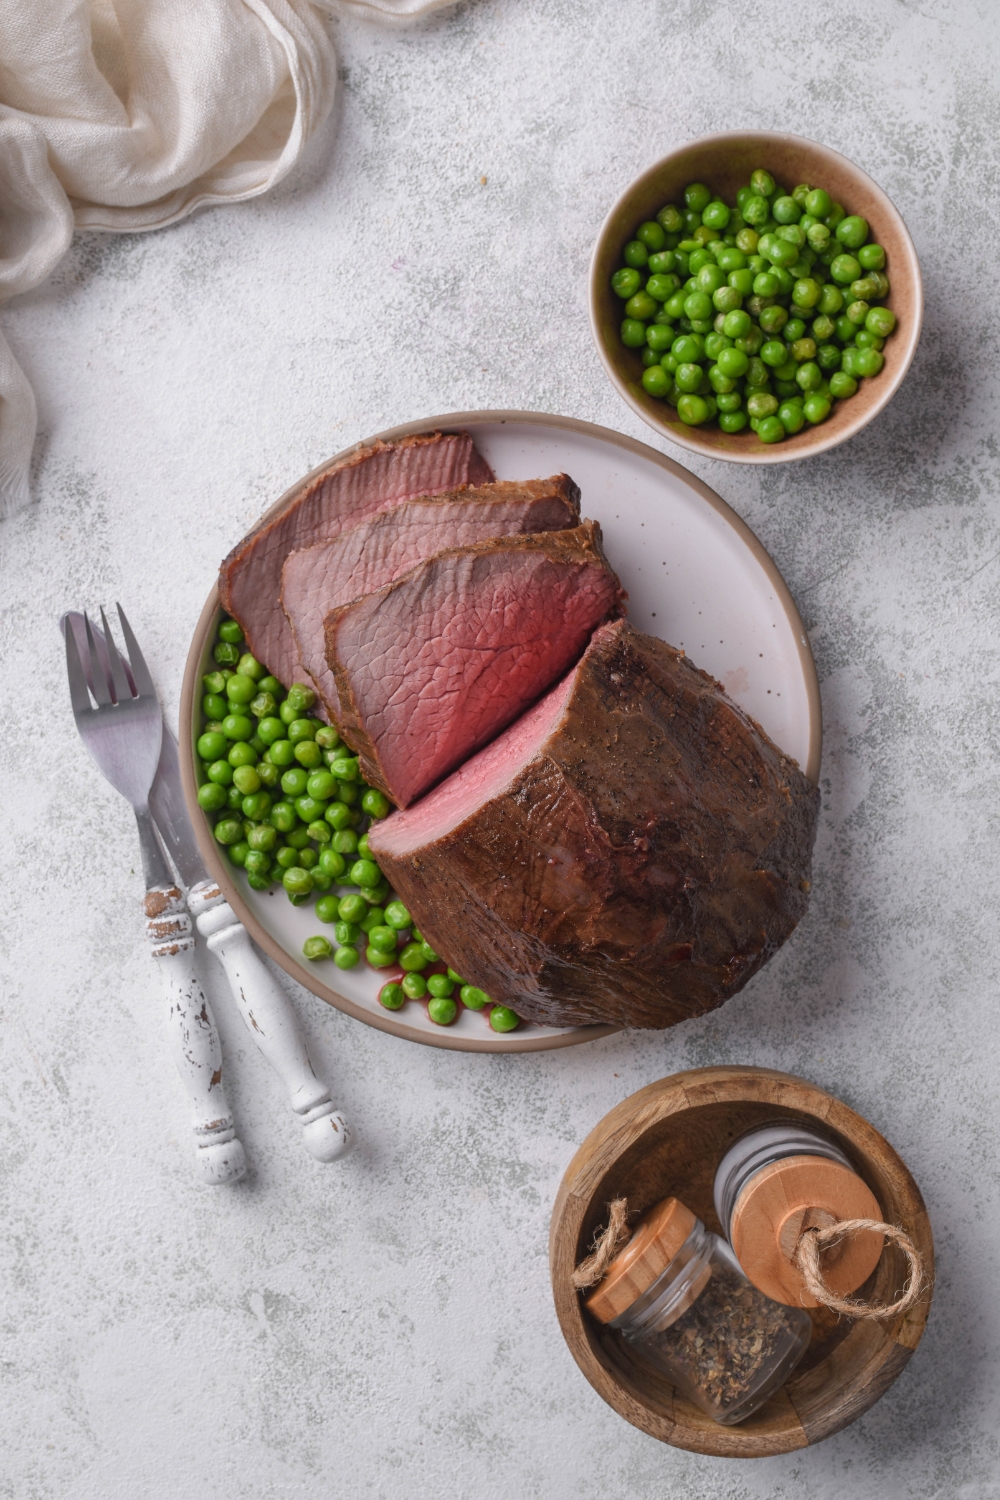 A rump roast sits on a white plate. Silverware is on the counter next to the plate and garden peas are in a bowl next to it.